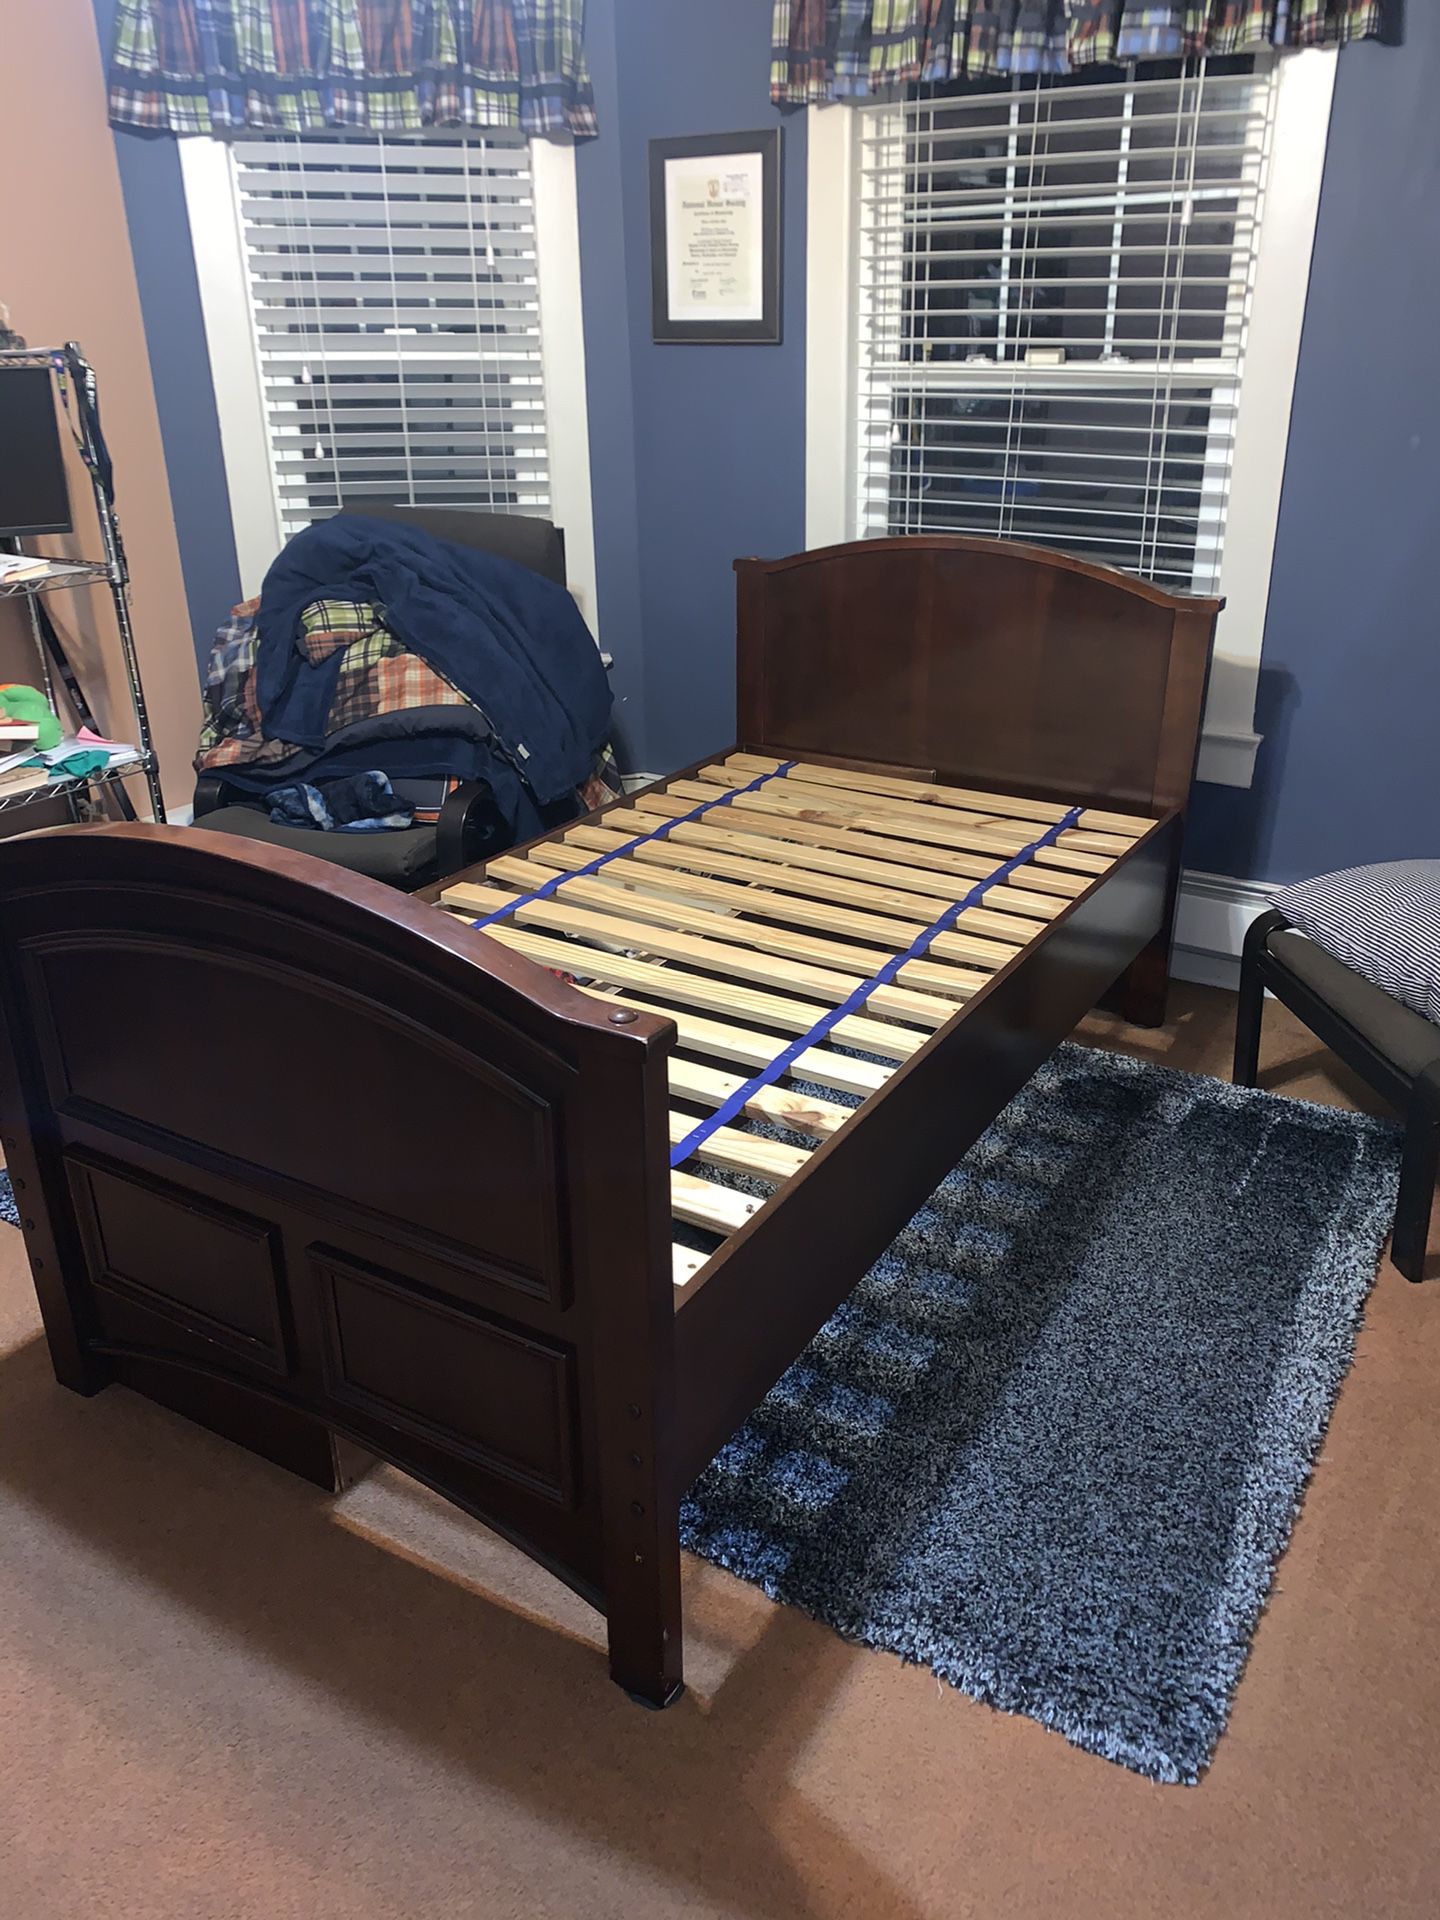 Twin Captains Bed In Good Condition FREE!!!